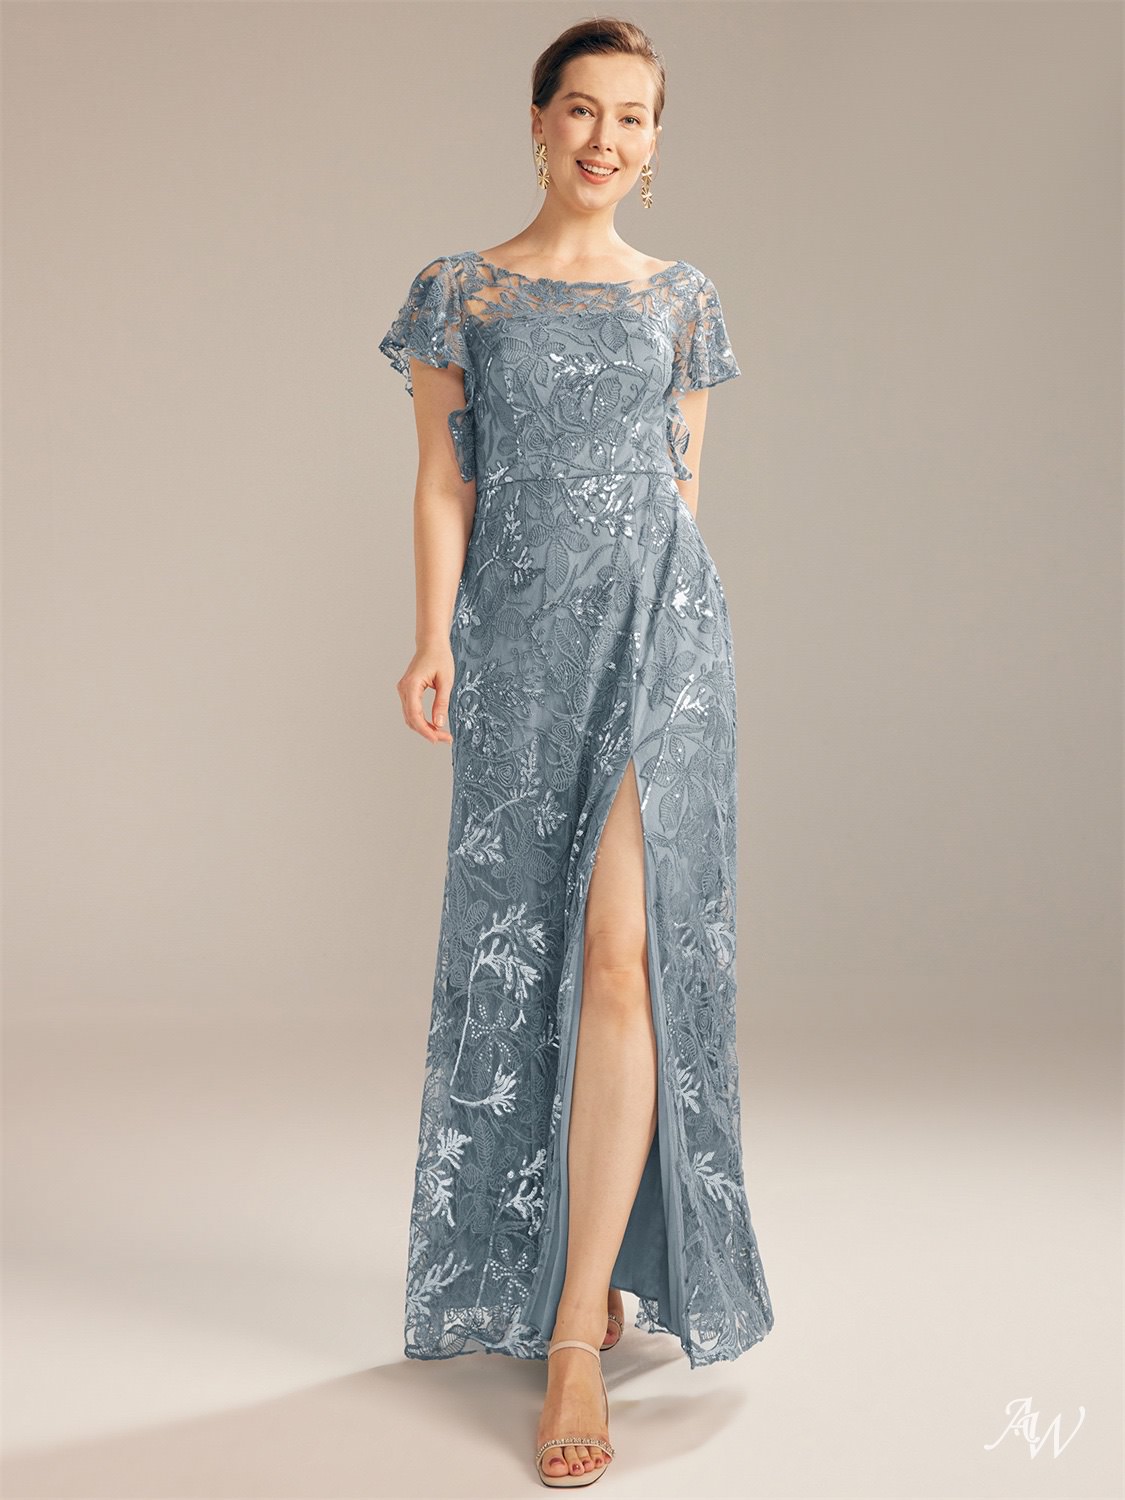 Sparkly Mother of The Bride Dress - AW Bridal - Aria